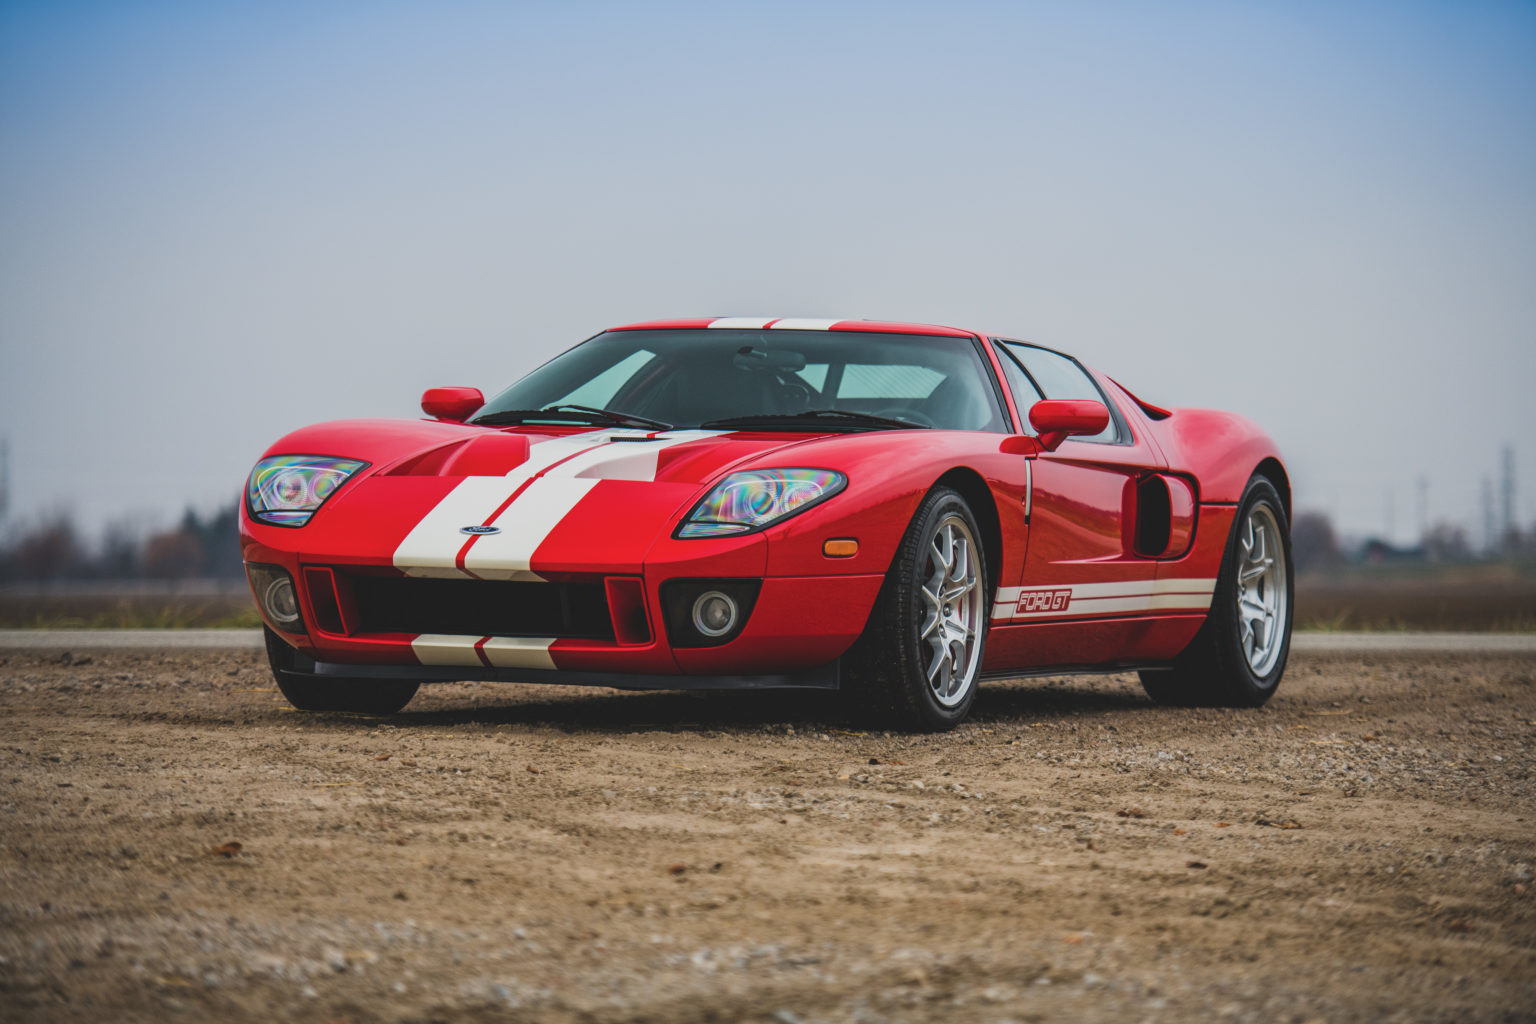 2006-Ford-GT- 11-1536x1024